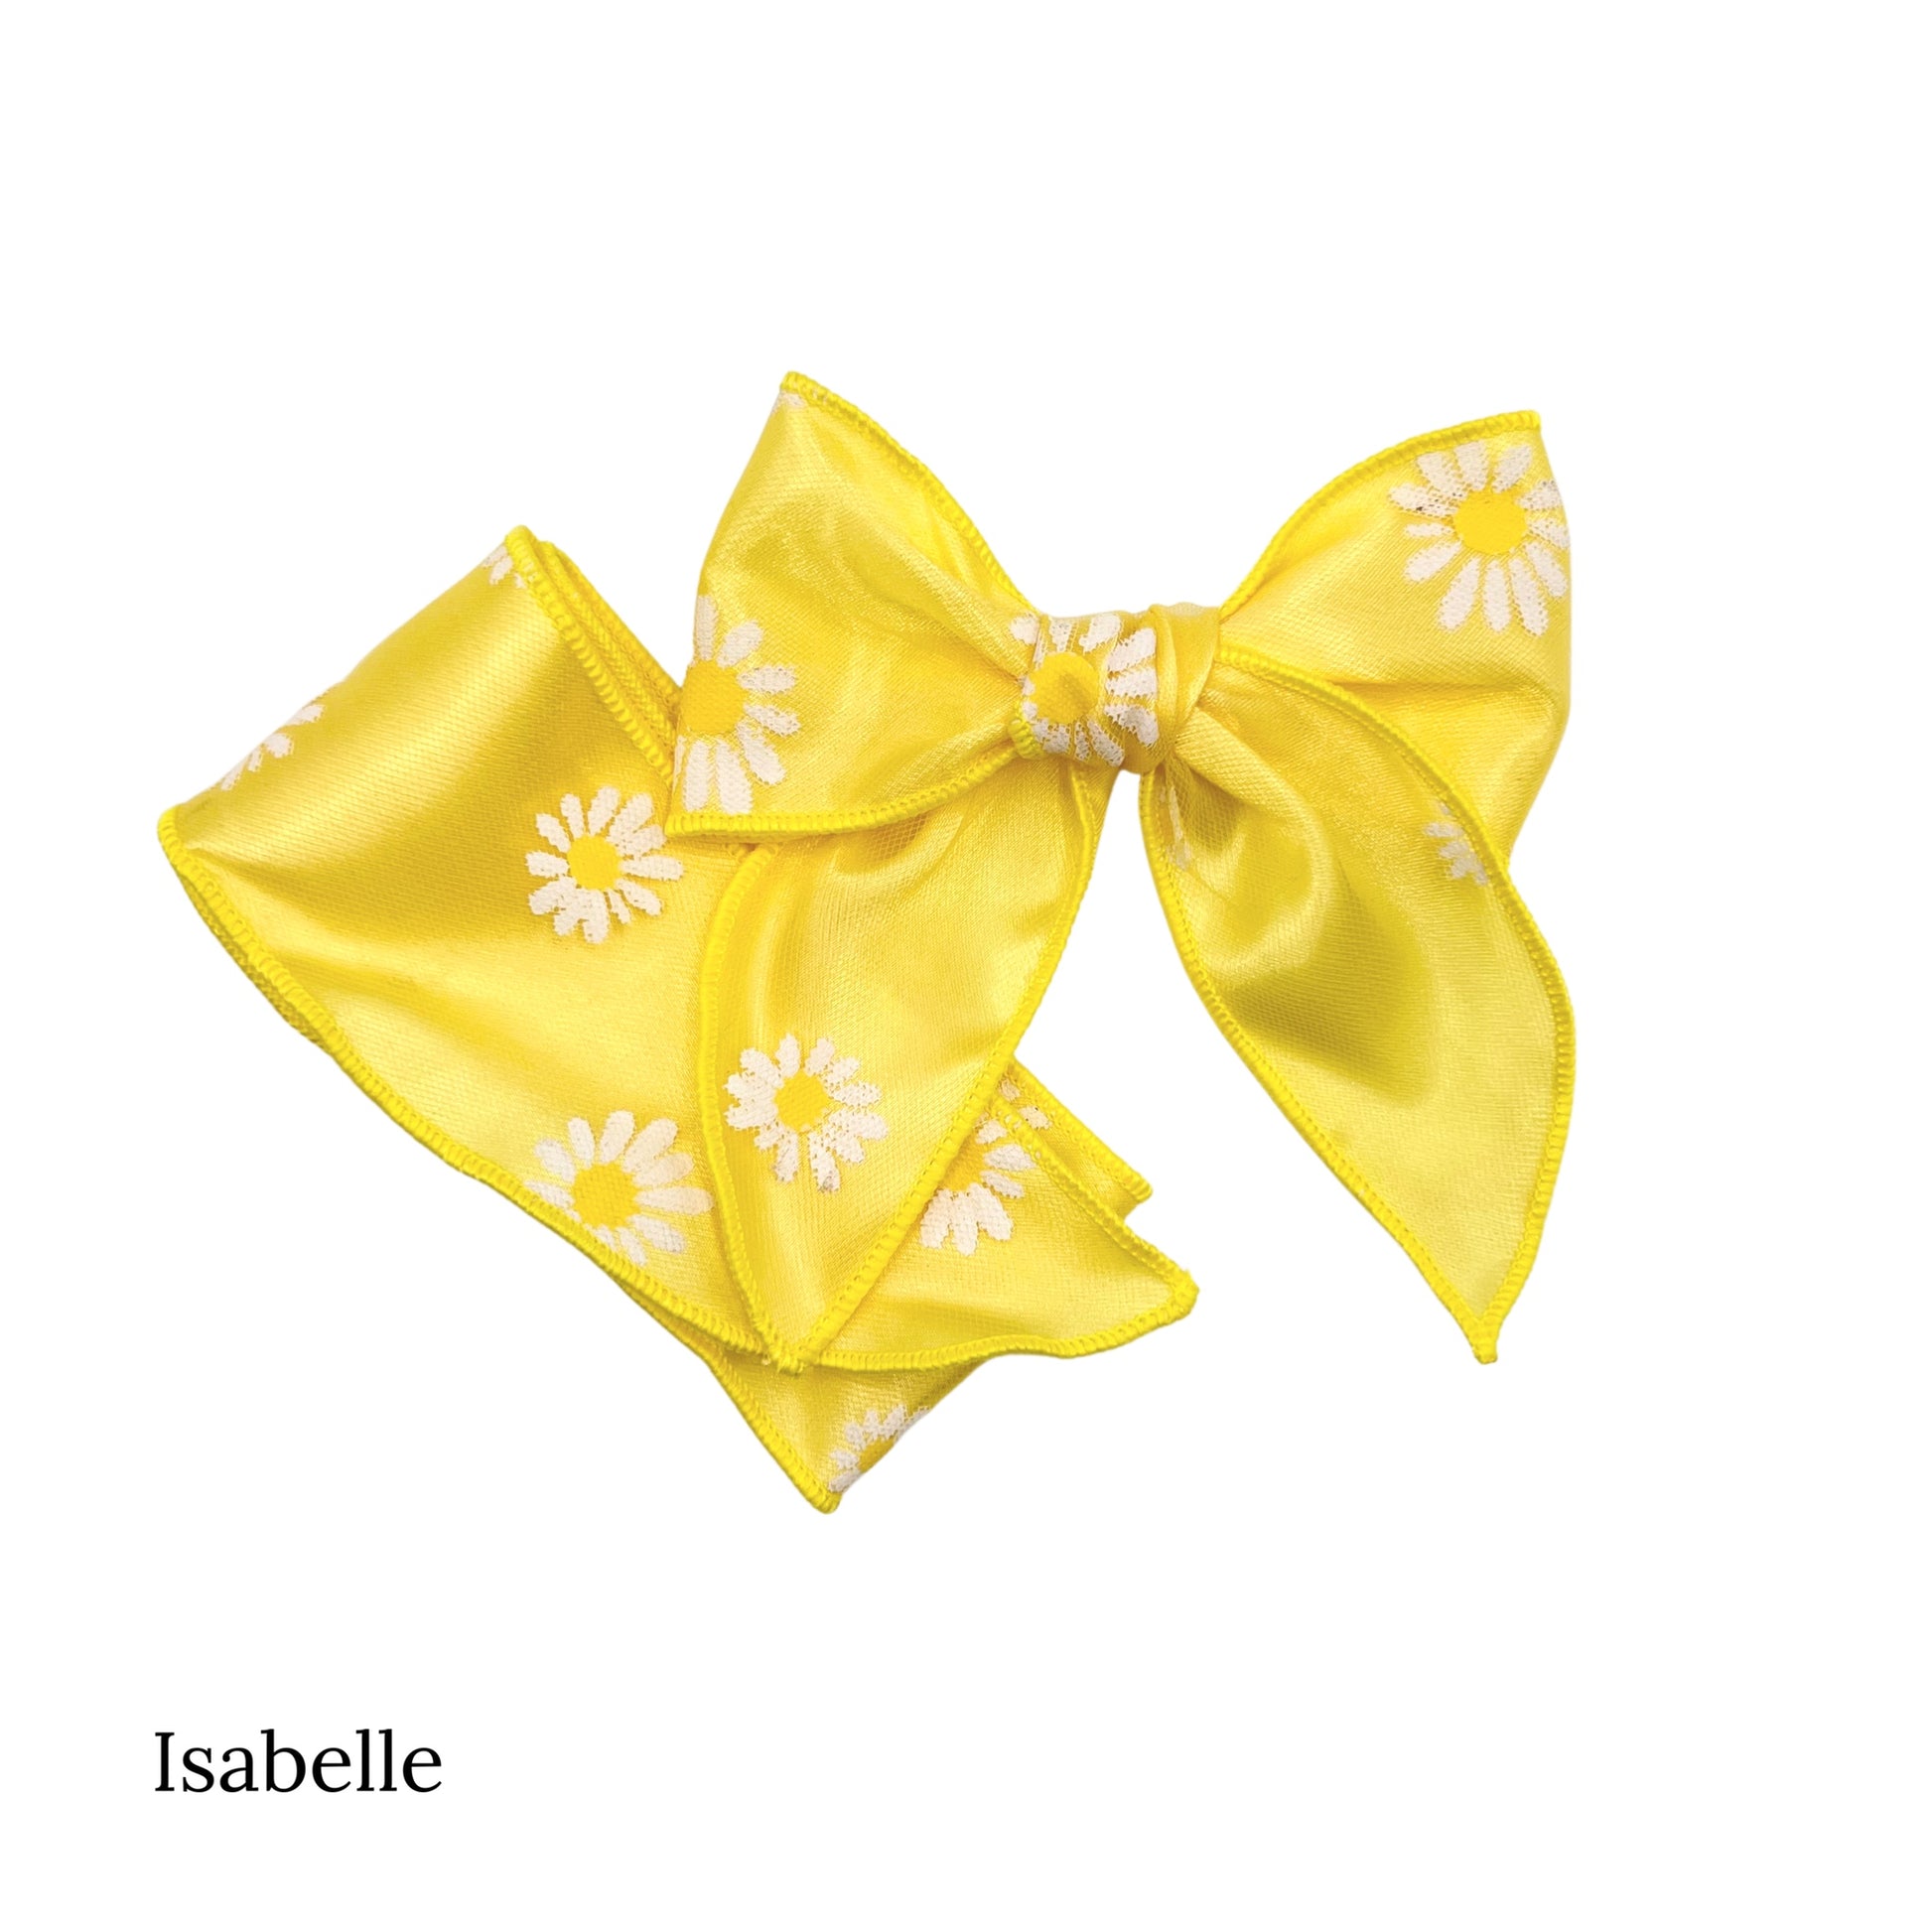 Yellow tulle bow with white daisies with yellow center on a isabelle bow strip